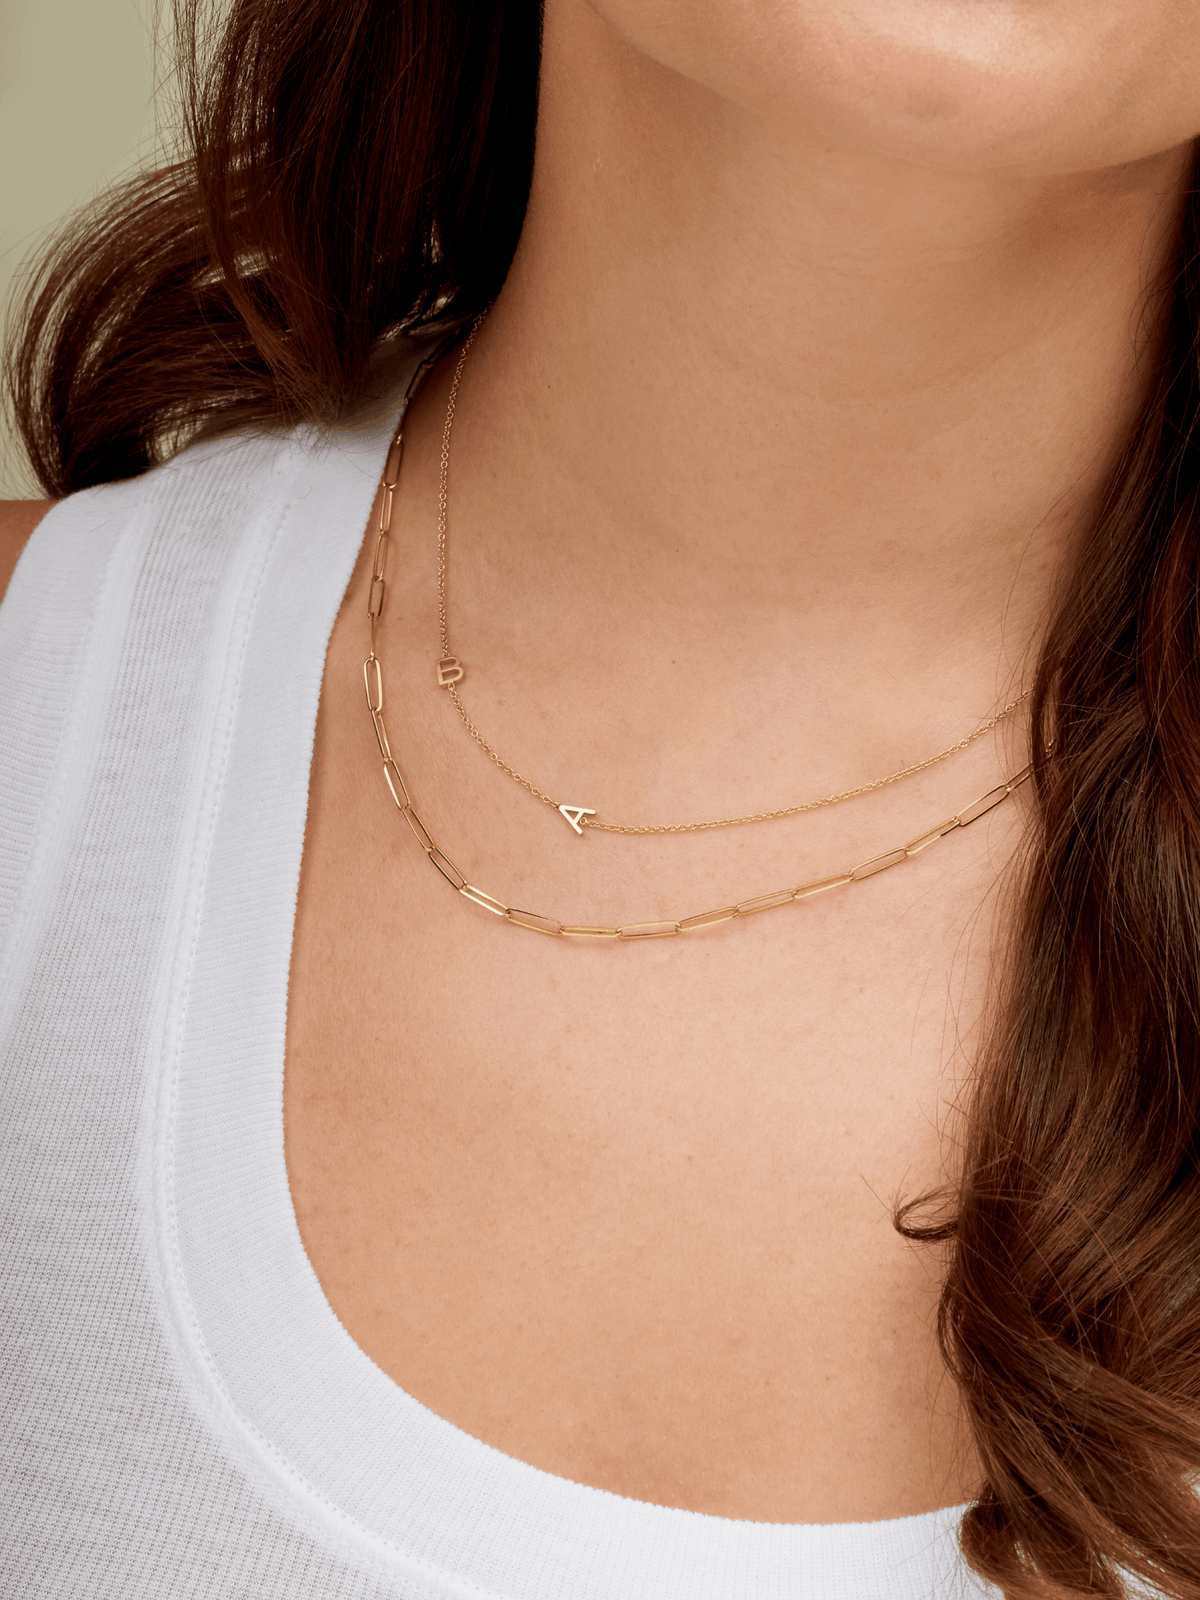 Dainty Gold Chain with Single Initial Letter Set asymmetrically in Chain layered with paperclip necklace